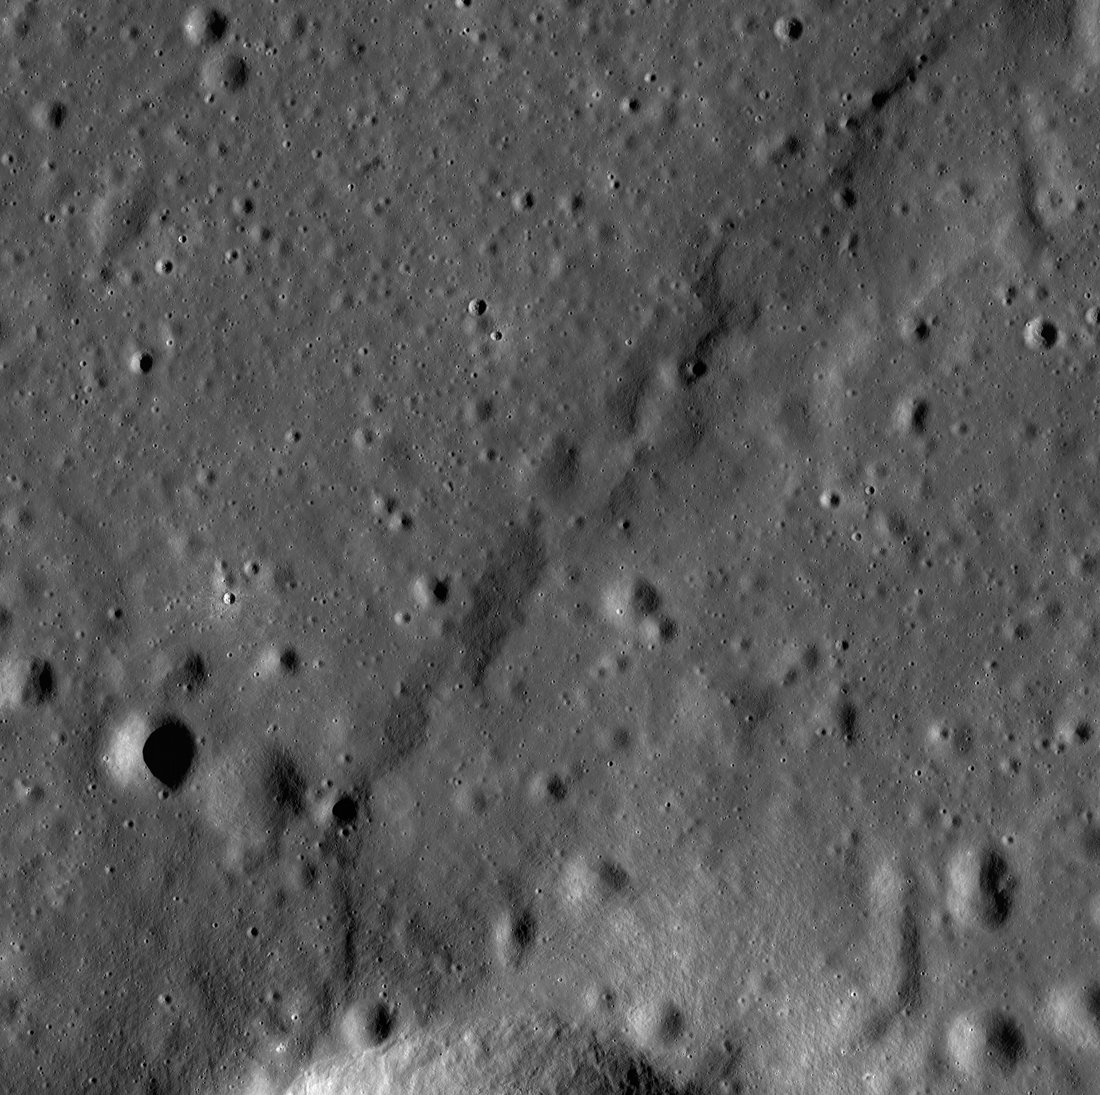 Wrinkle ridge north of Blagg crater.